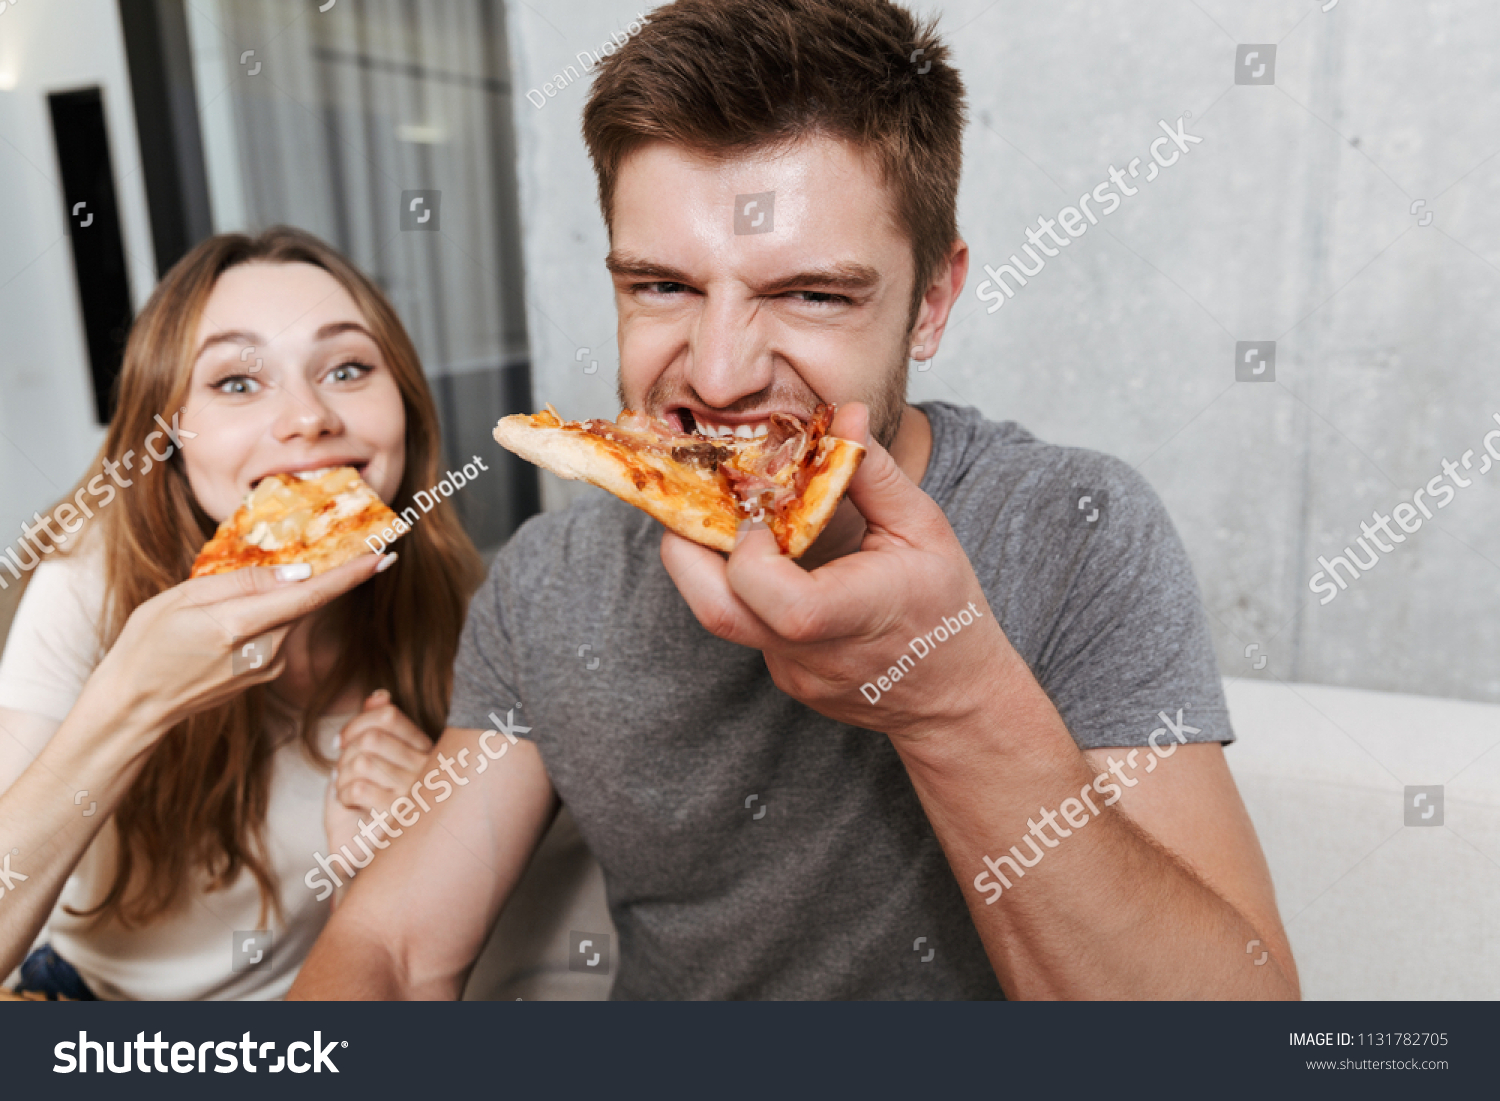 Close up of happy young couple eating pizza while sitting together on couch at home #1131782705